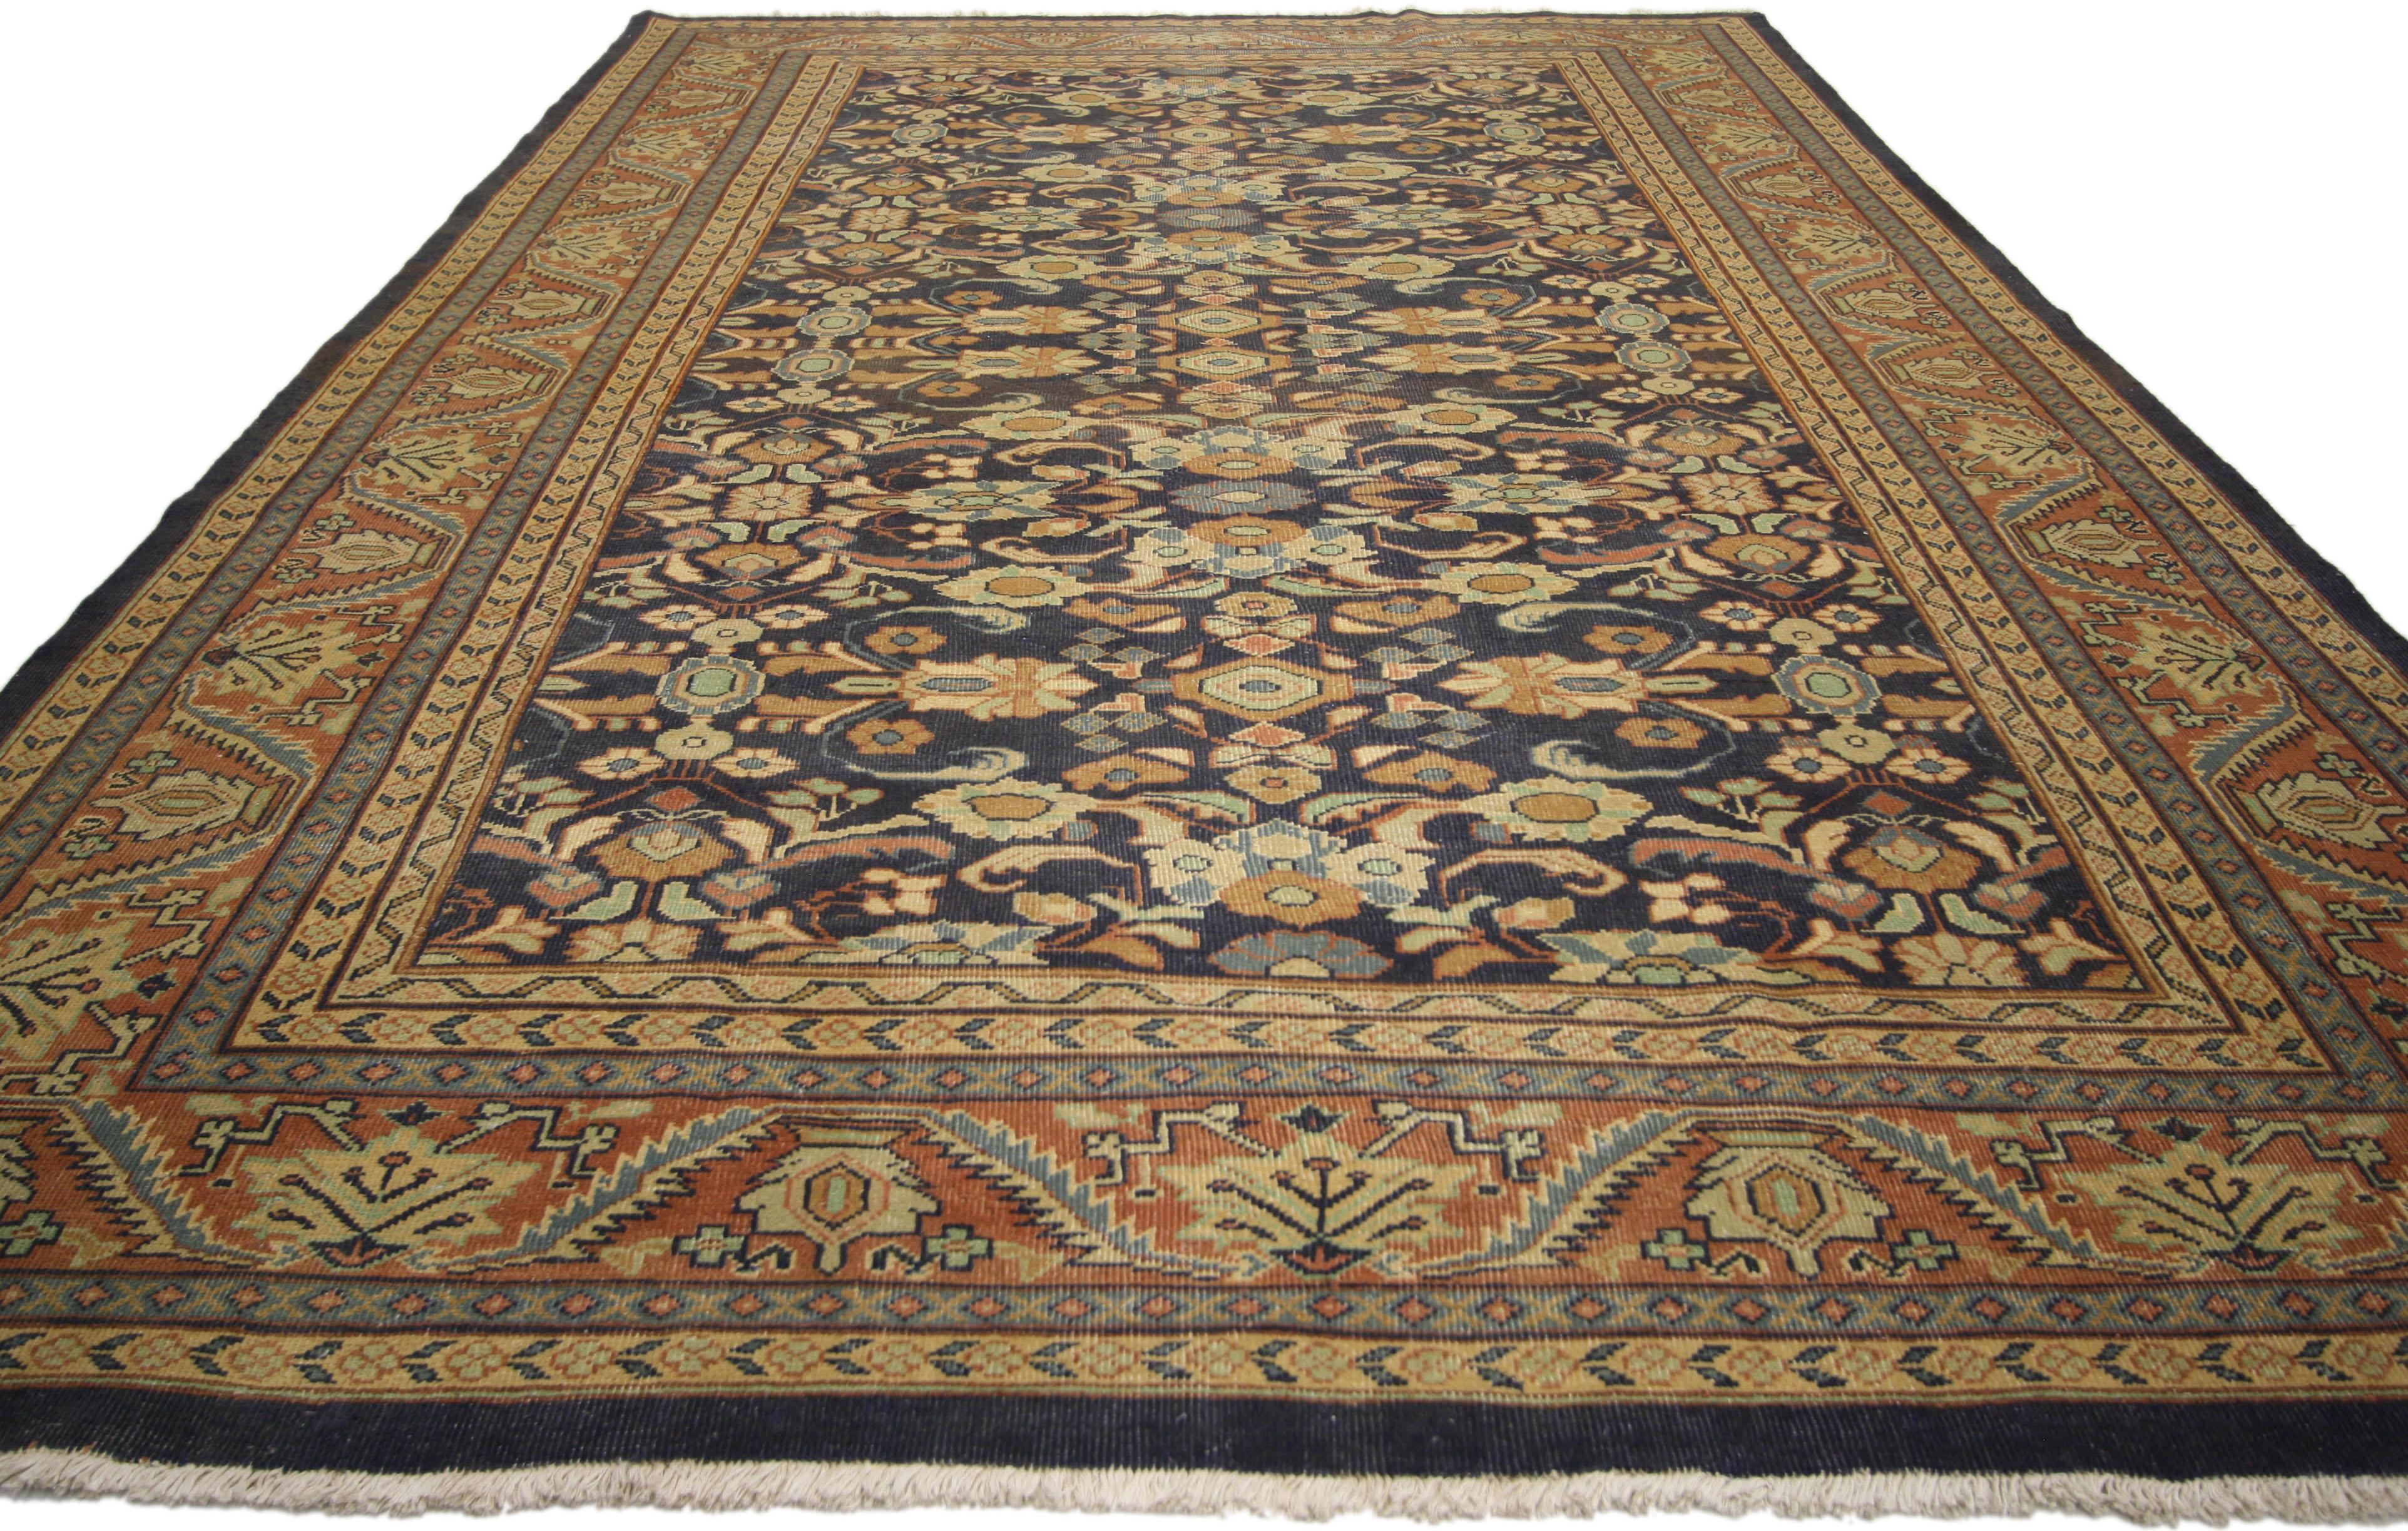 75830 Vintage Persian Mahal Area rug with Traditional style. With classic architectural details adding timeless elegance and a sense of history, this hand knotted wool vintage Persian Mahal rug with traditional style features a lively all-over